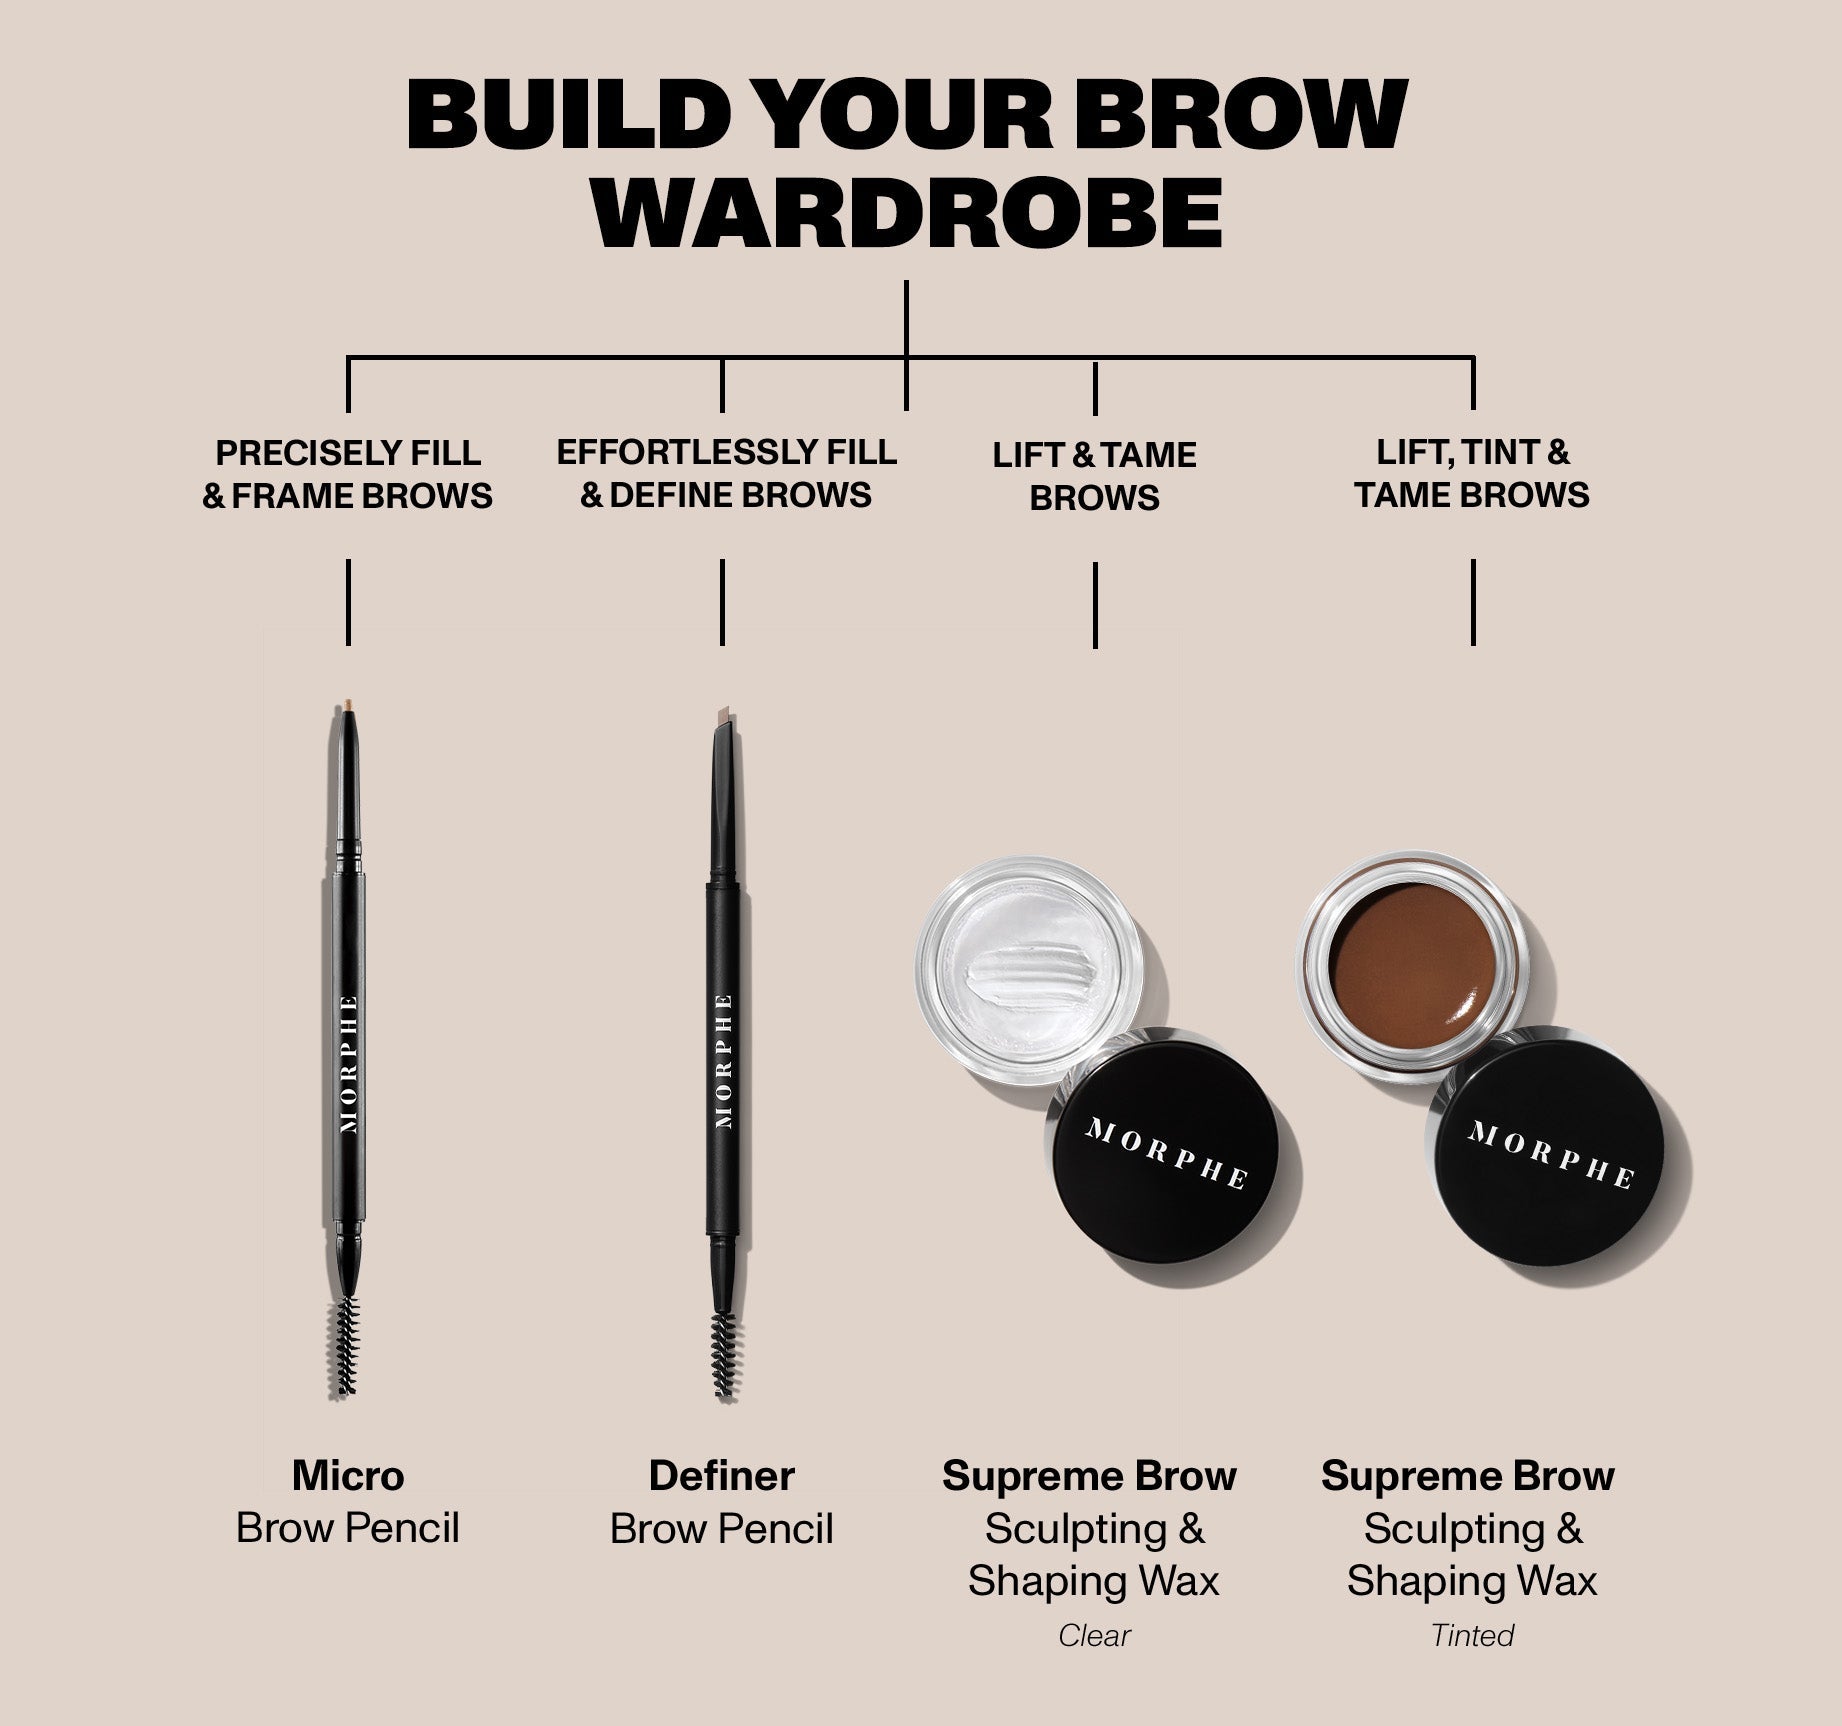 Supreme Brow Sculpting And Shaping Wax - Chocolate Mousse - Image 10